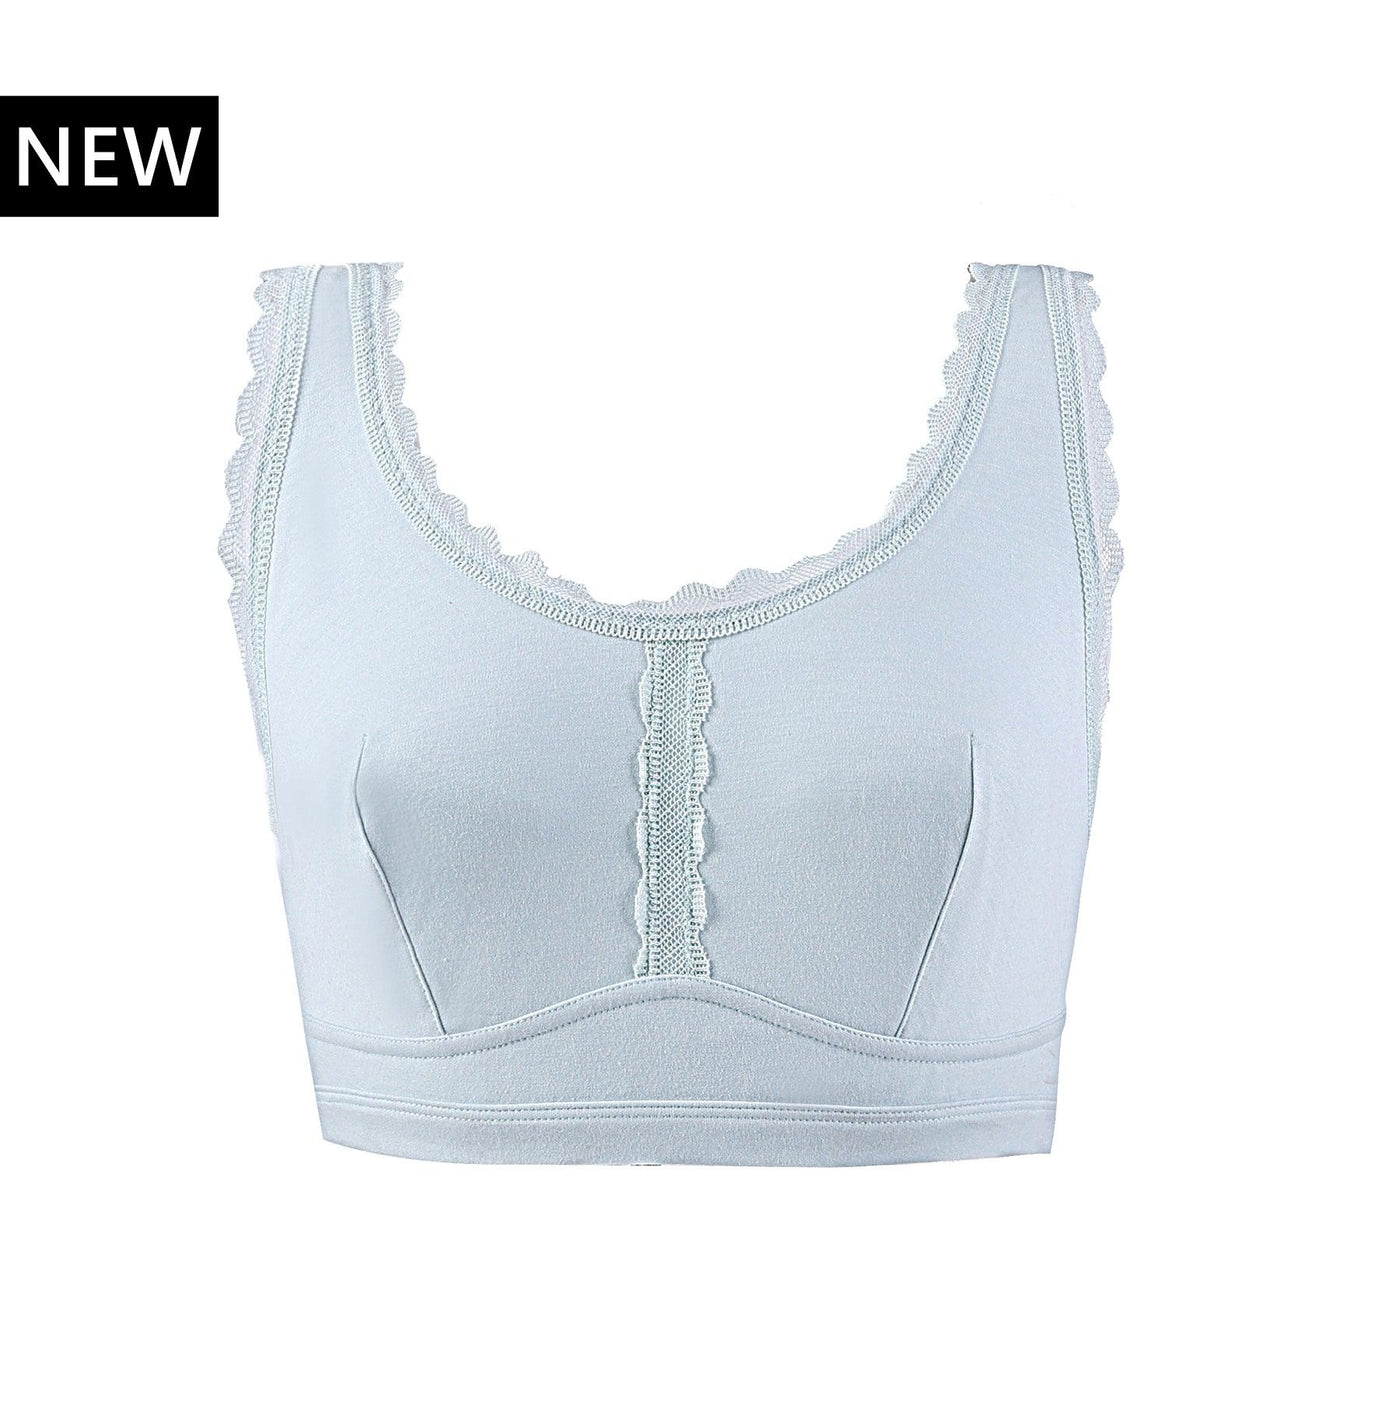 Buy Padded Non Wired Sports Bra, Aruba Blue Color